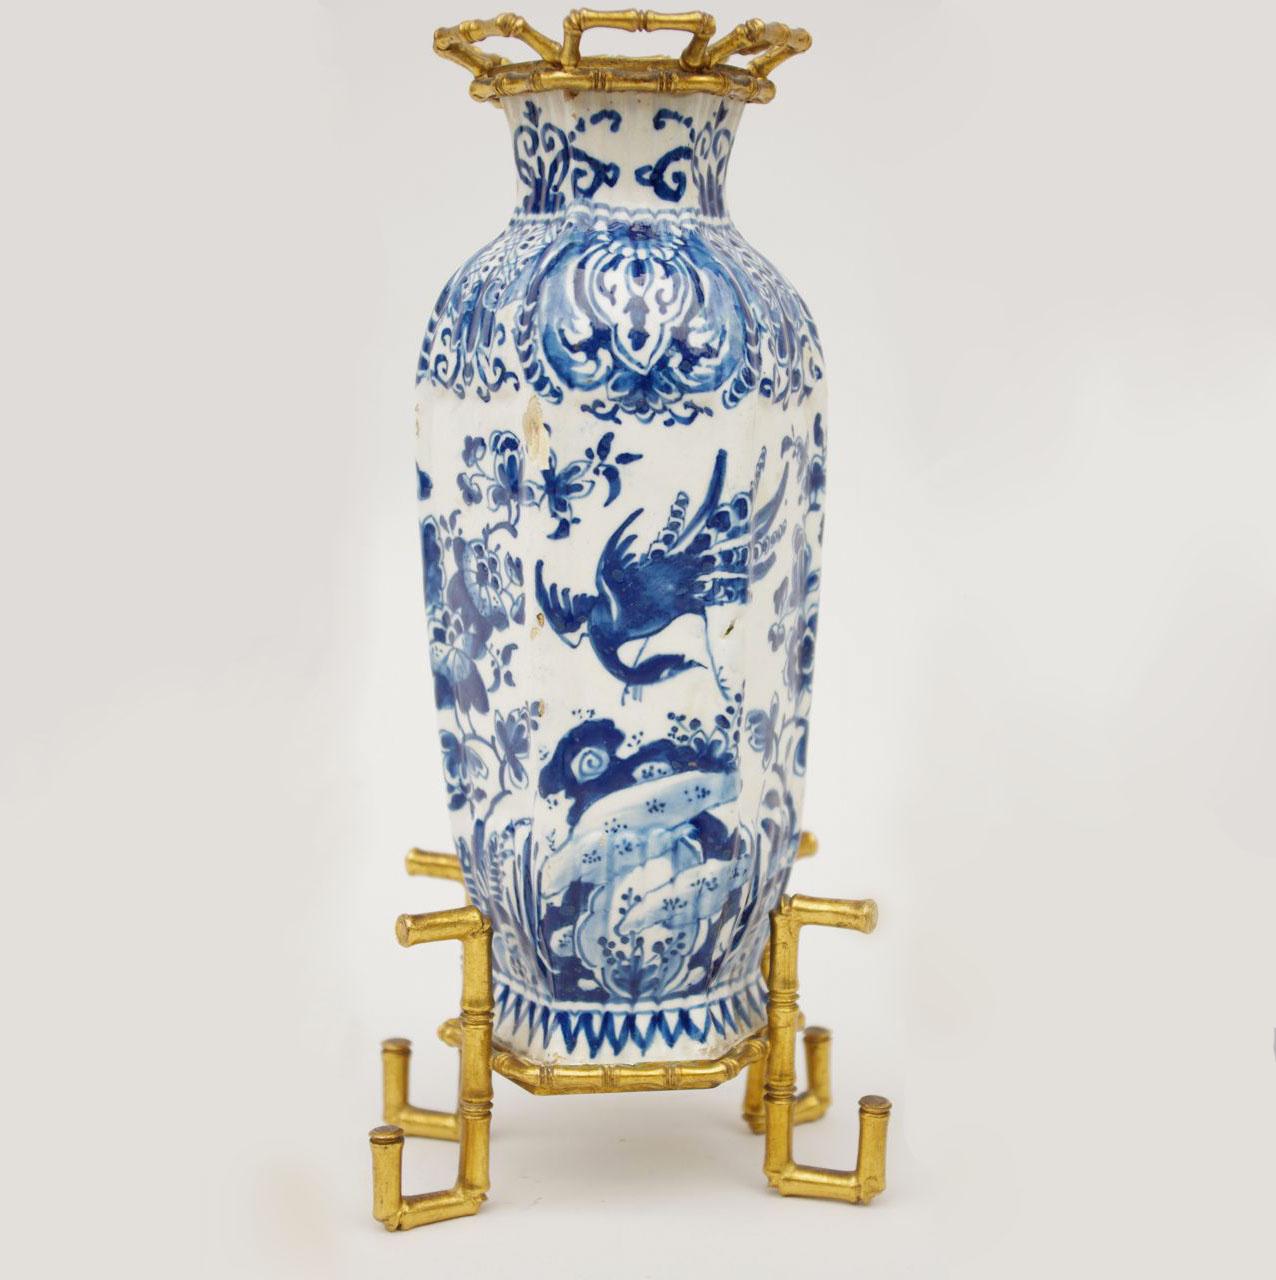 Small baluster shape vase with canted corners. Blue and white decoration, typical of the Delftware production and inspired by the blue and white Chinese porcelains. The body is decorated with pots and vases filled with flowers, flowery branches and